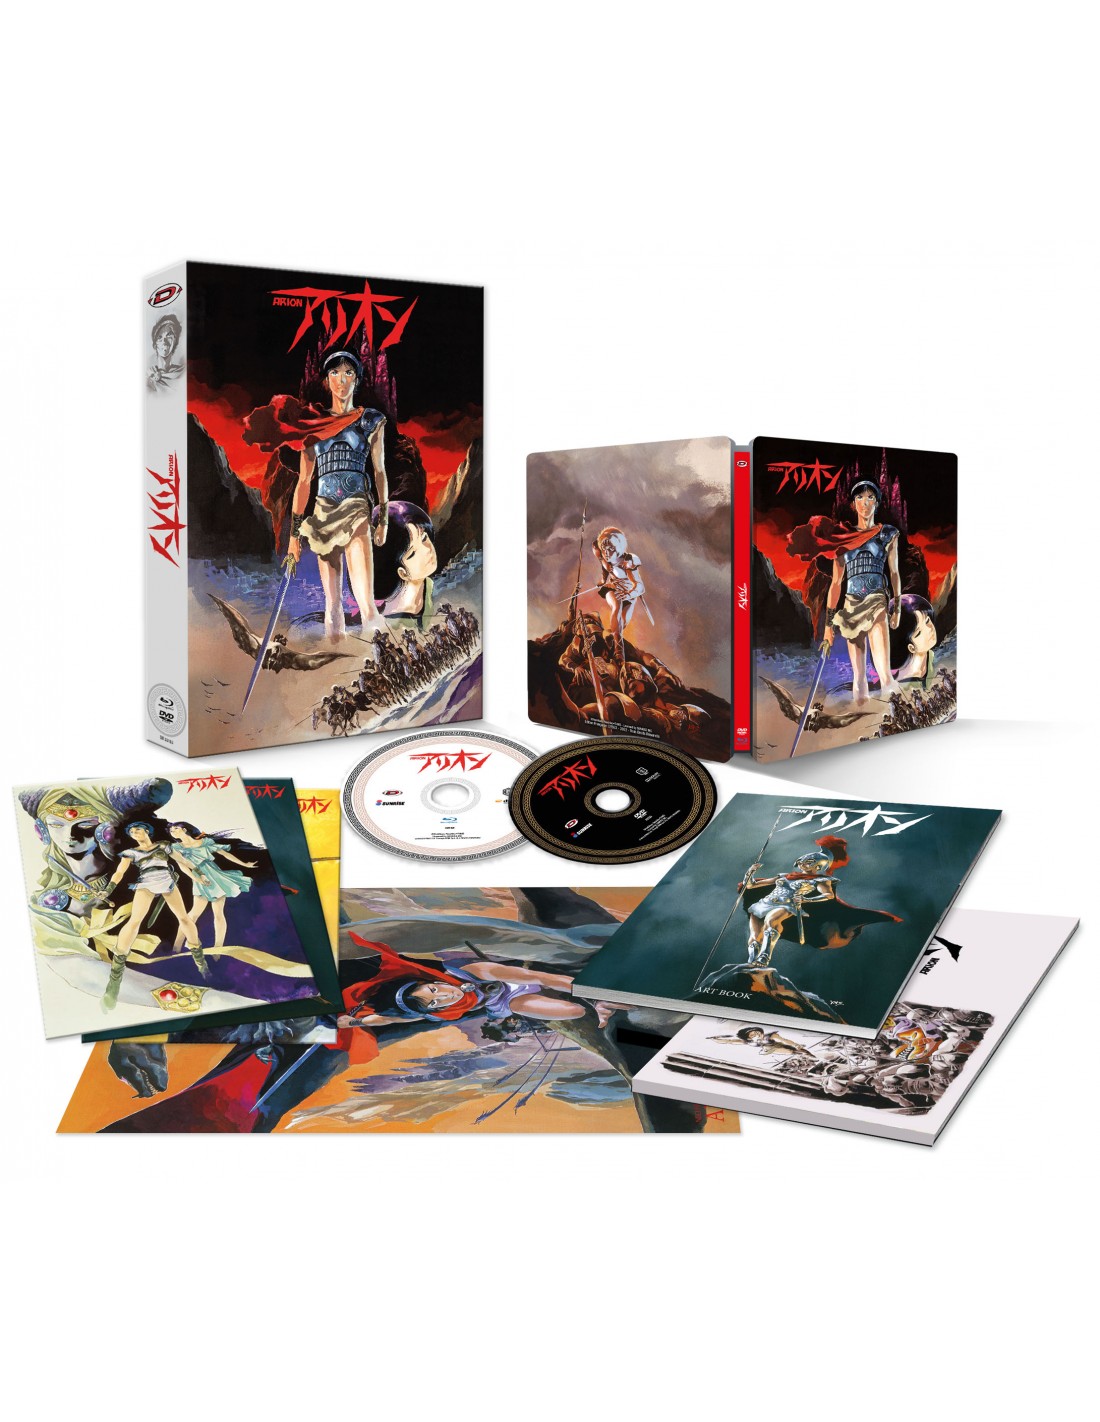 Arion - Film - Edition Collector - Coffret A4 Combo Blu-ray + DVD